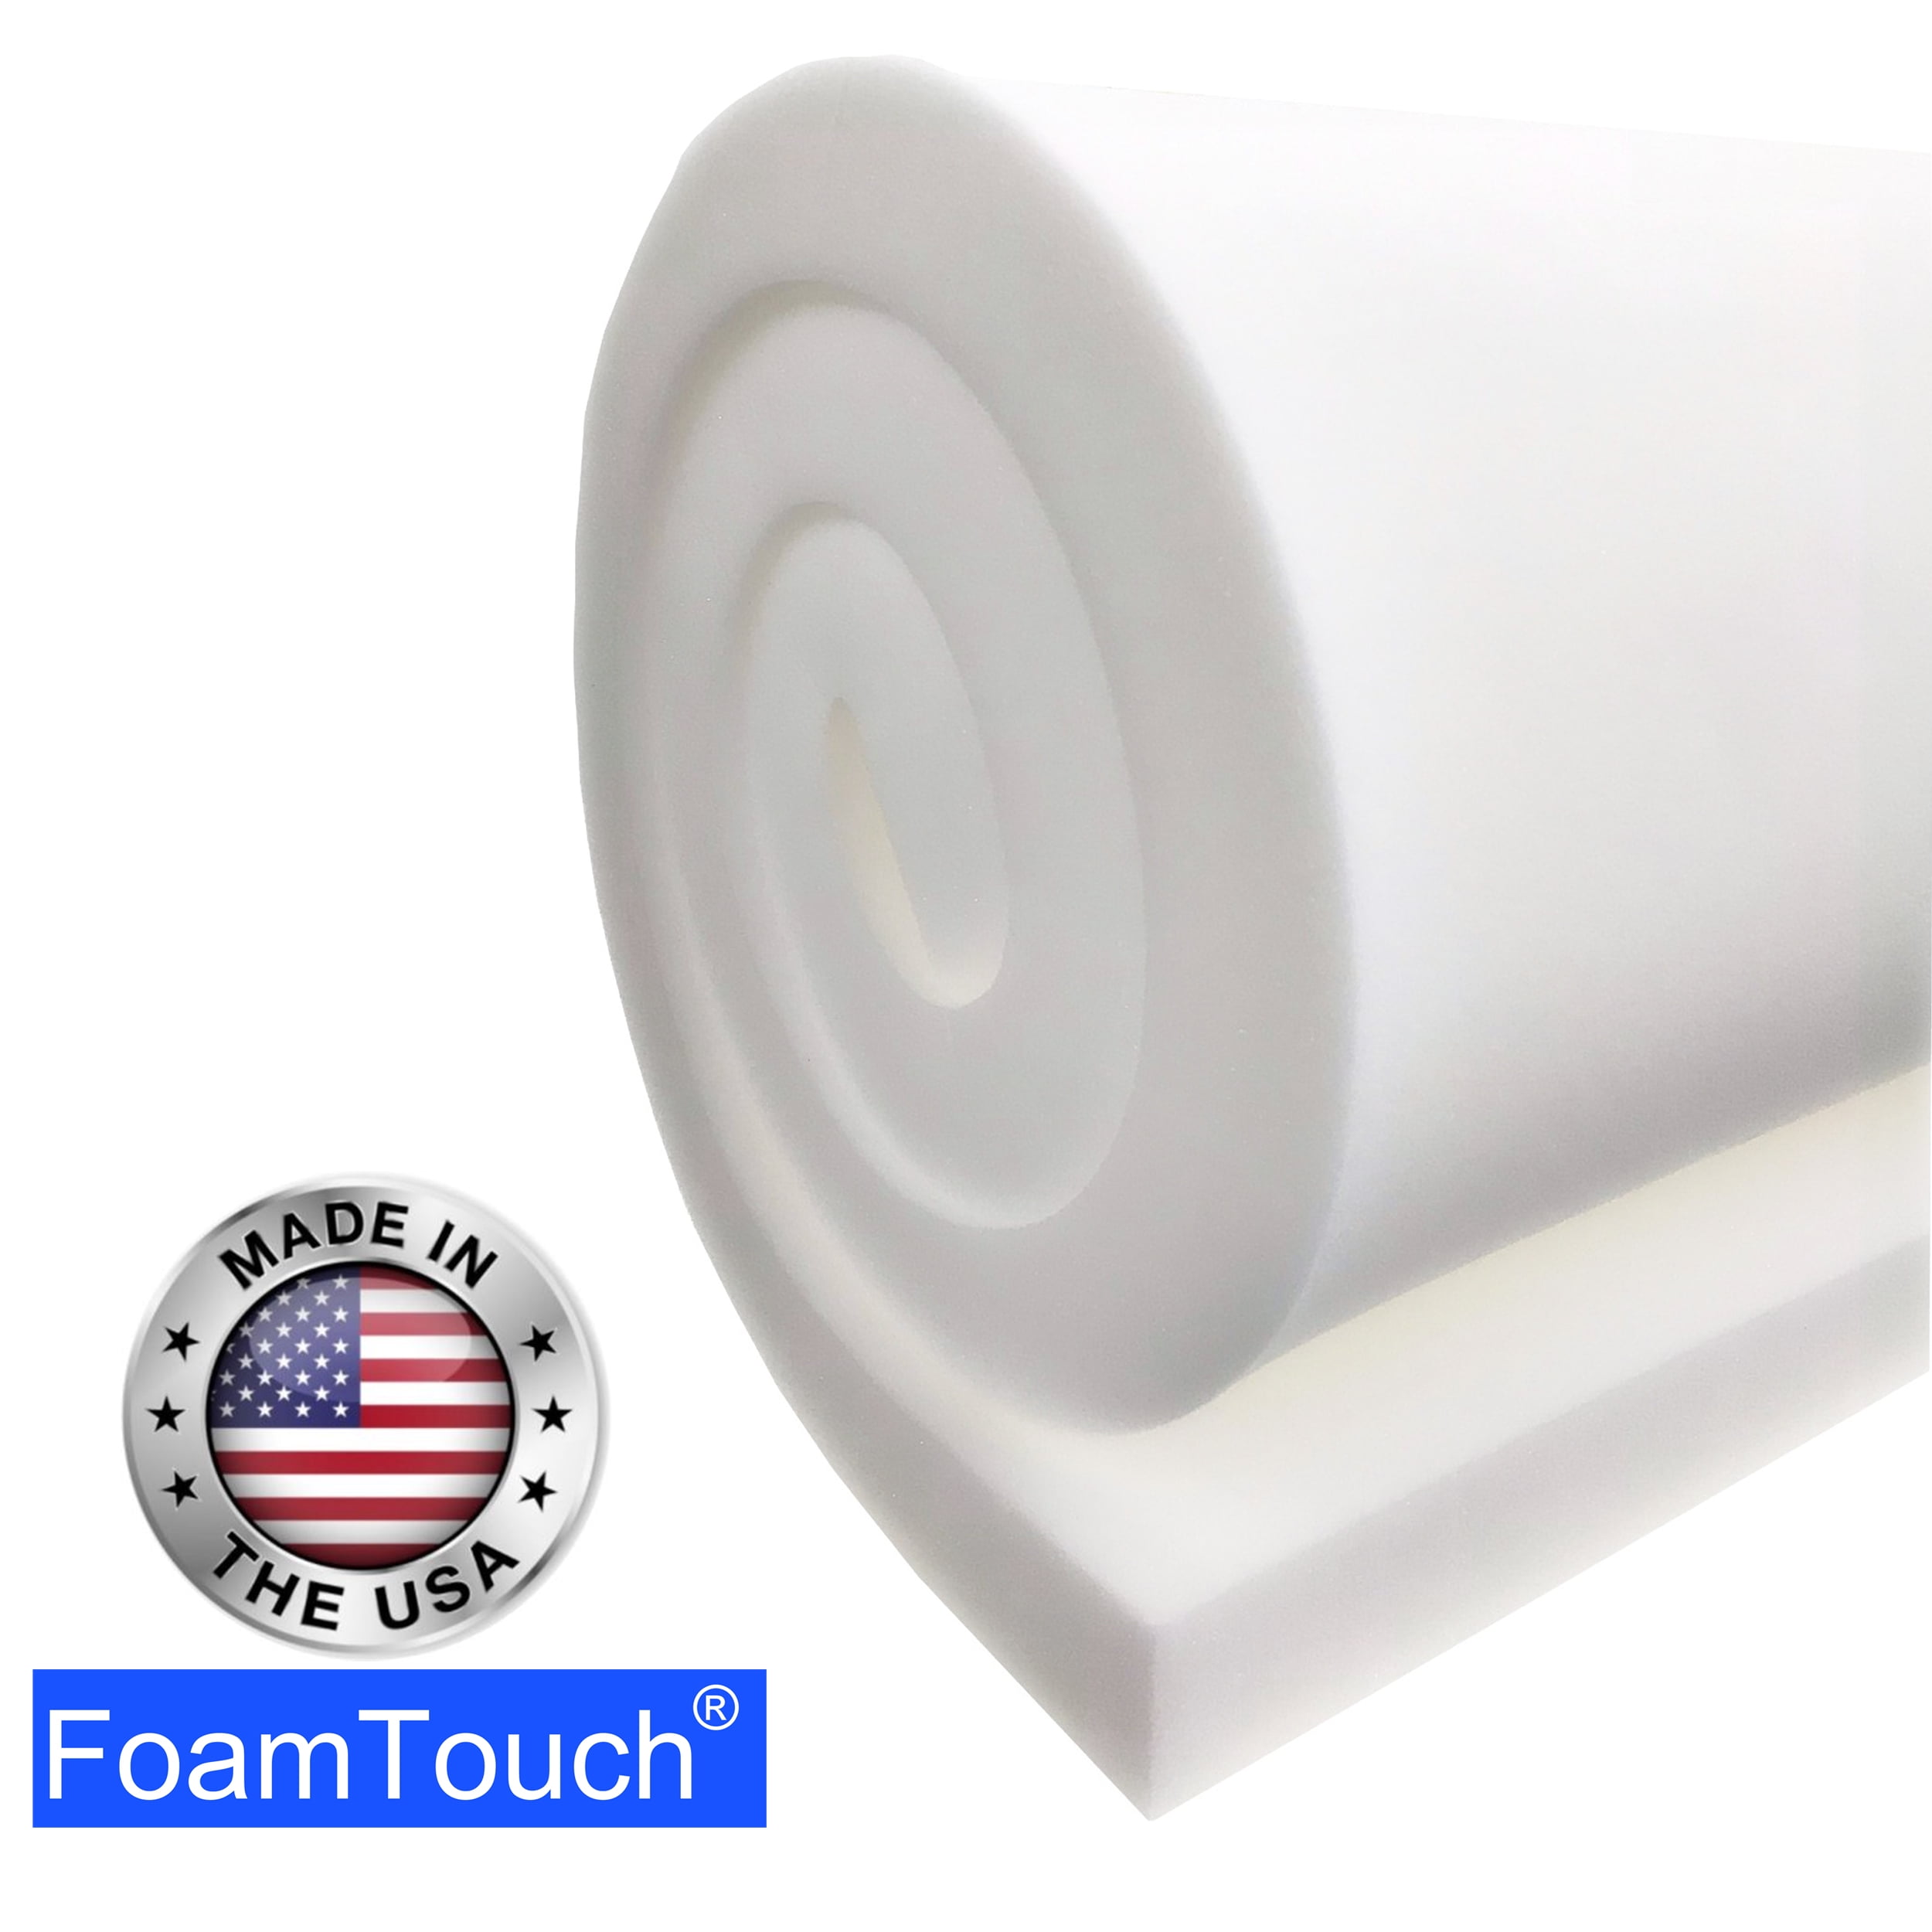 UPHOLSTERY FOAM SHEET HIGH DENSITY BLUE 60" x 20" ANY THICKNESS SIZE 